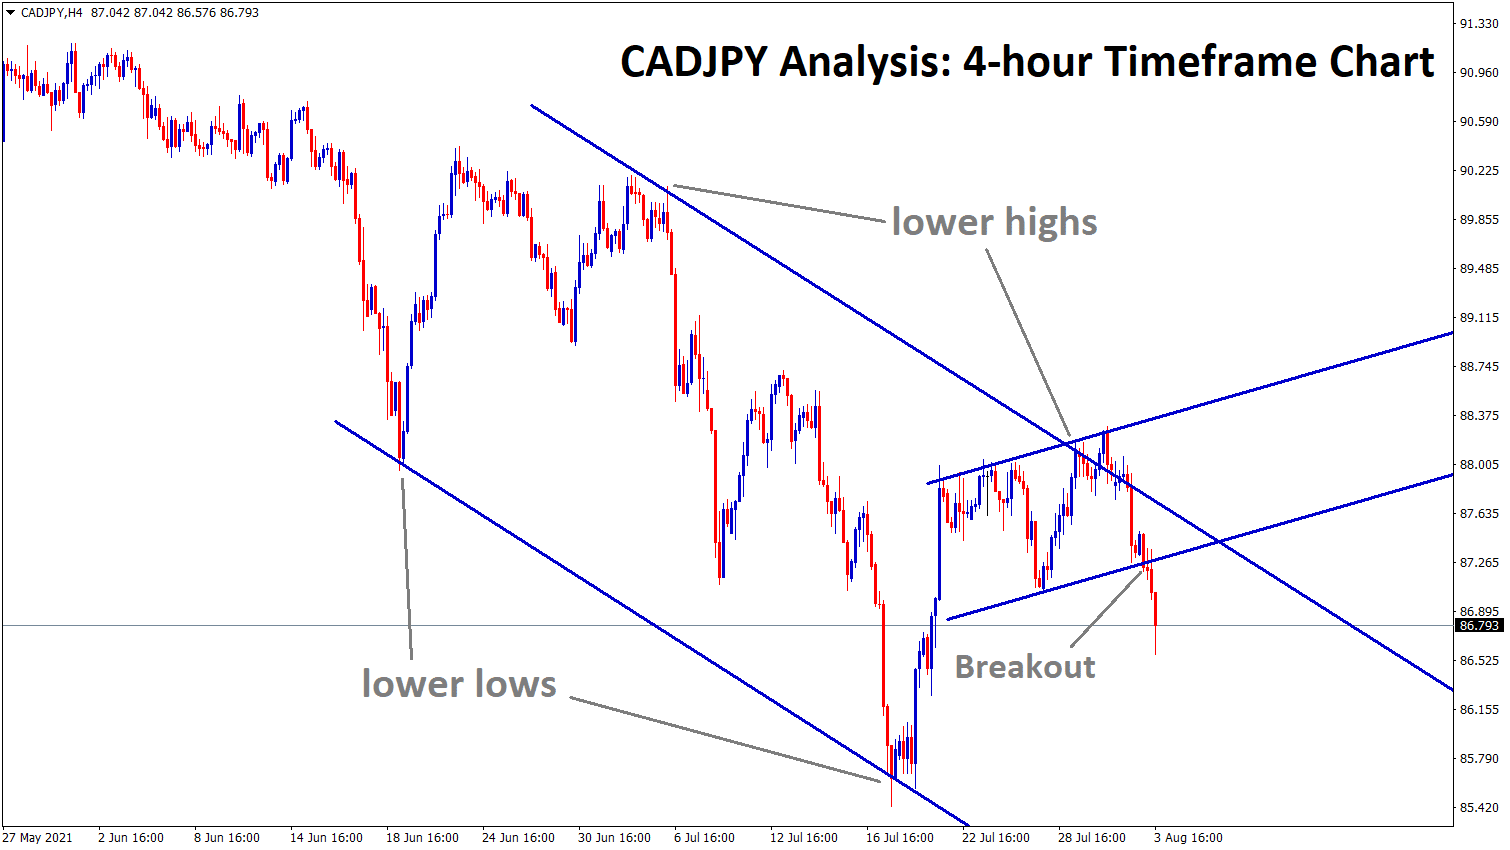 CADJPY starts to move in a descending channel breaking the minor range